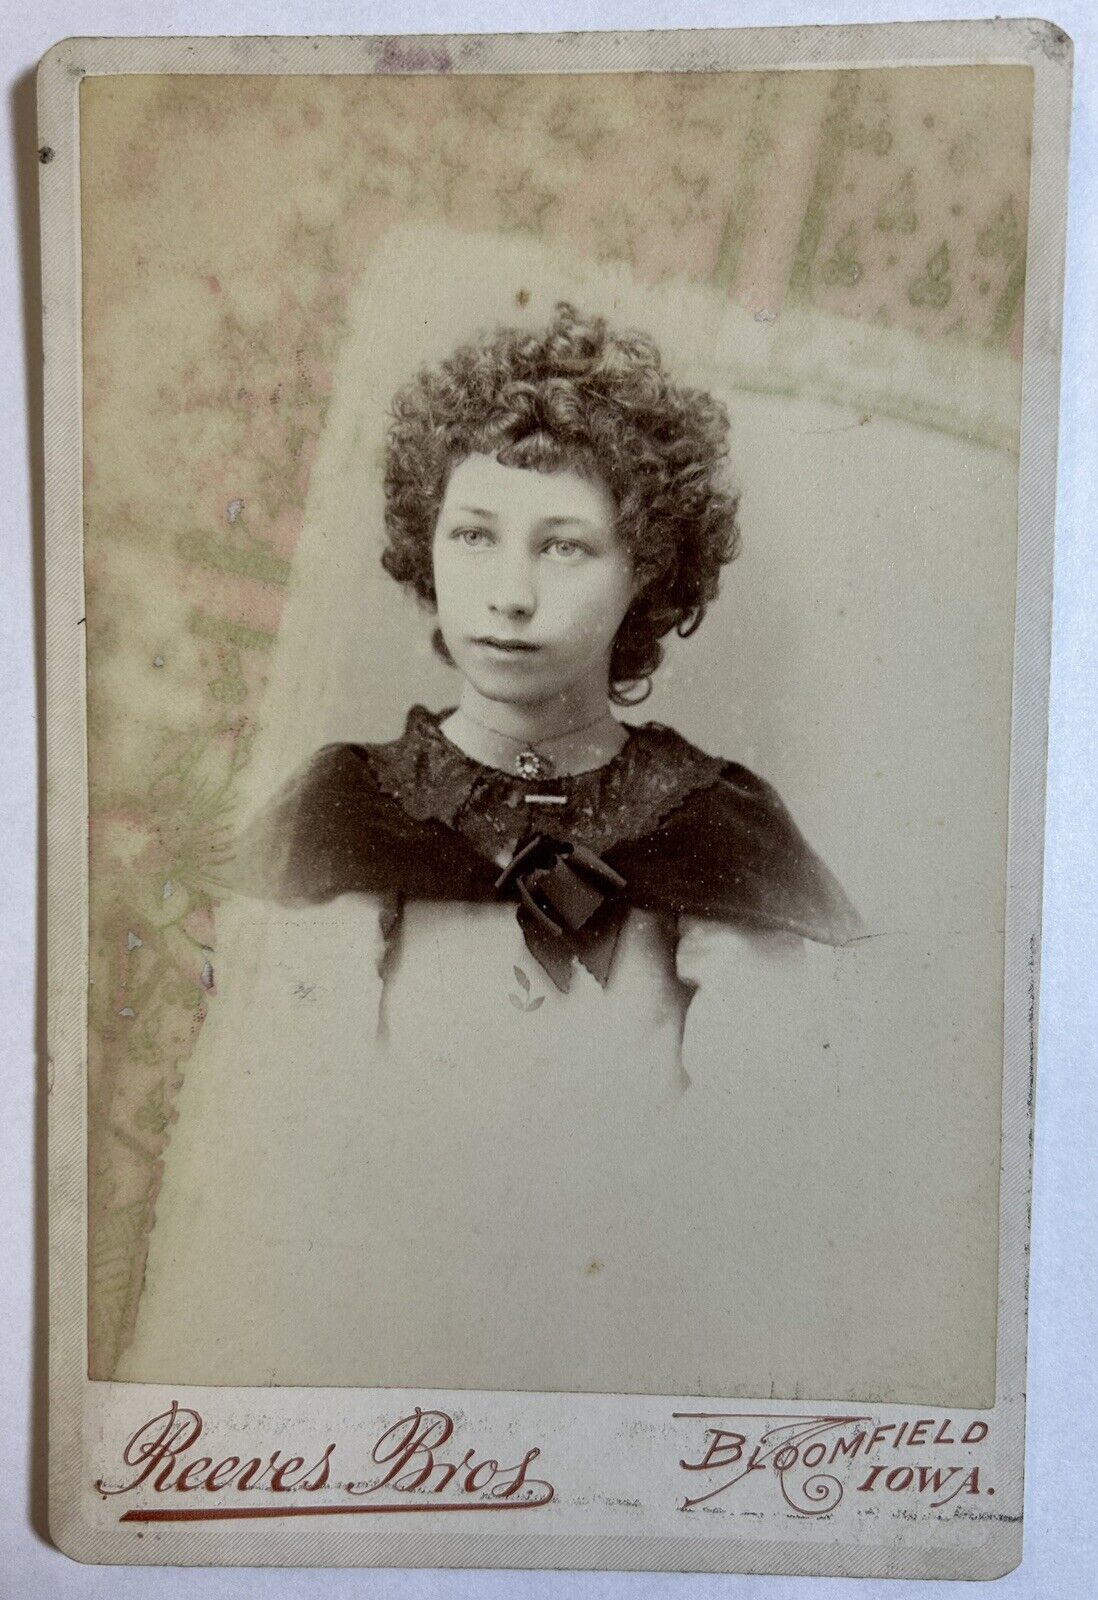 Antique Black & White Portrait of Young Woman, Reeves Bros. Bloomfield, Iowa 4x5